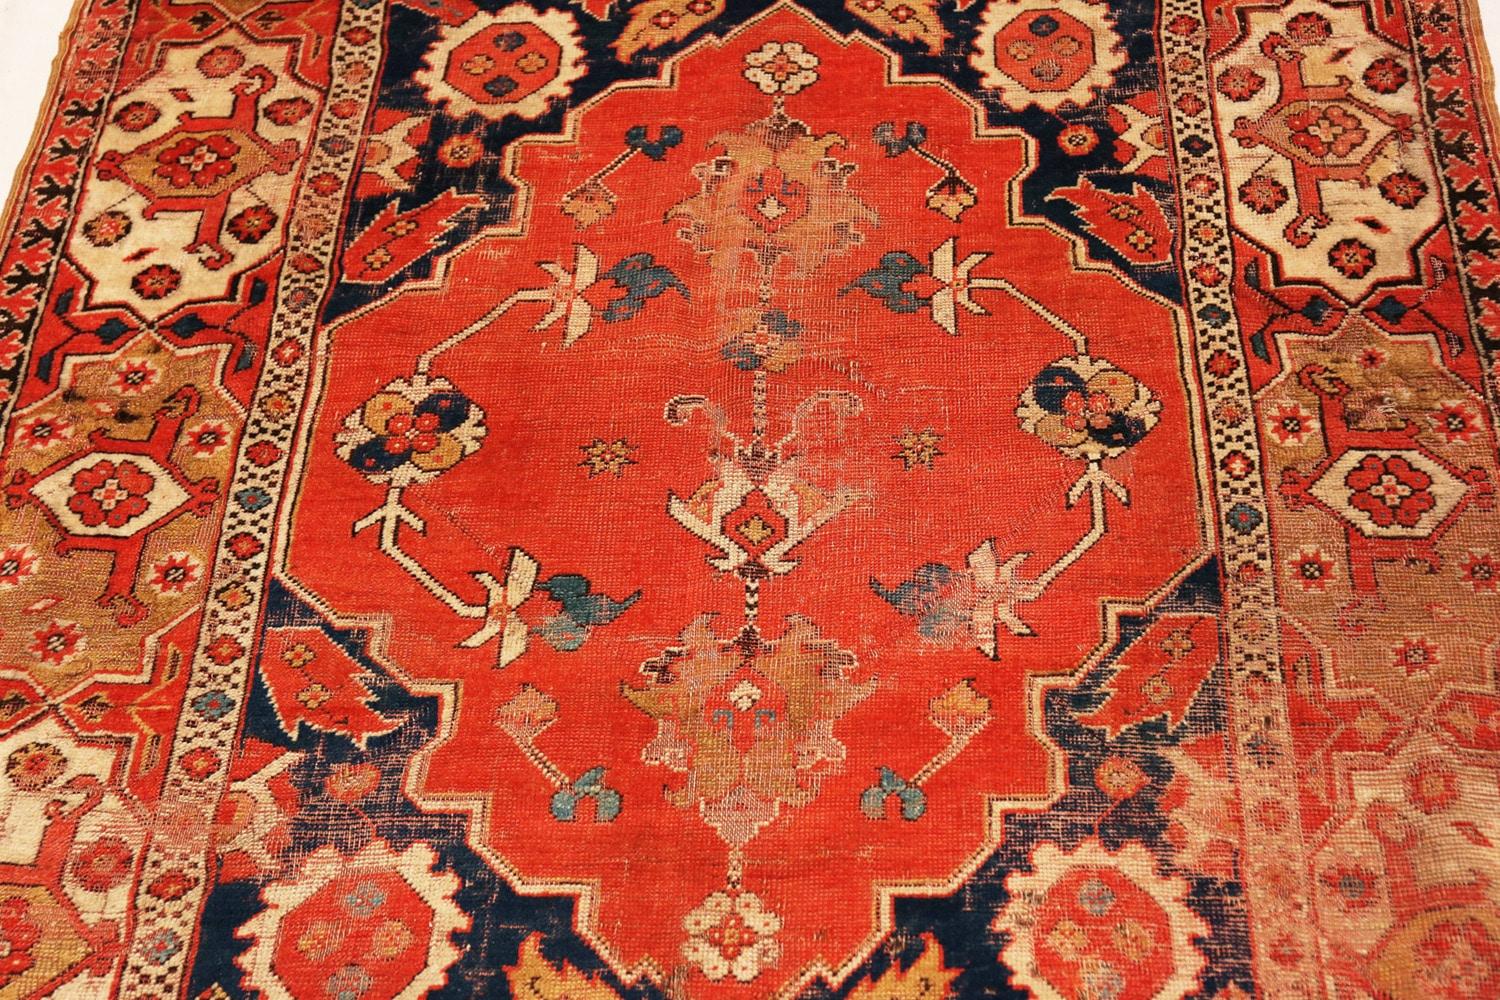 Tribal Nazmiyal Antique 17th Century Transylvanian Rug. 3 ft 10 in x 5 ft 3 in 